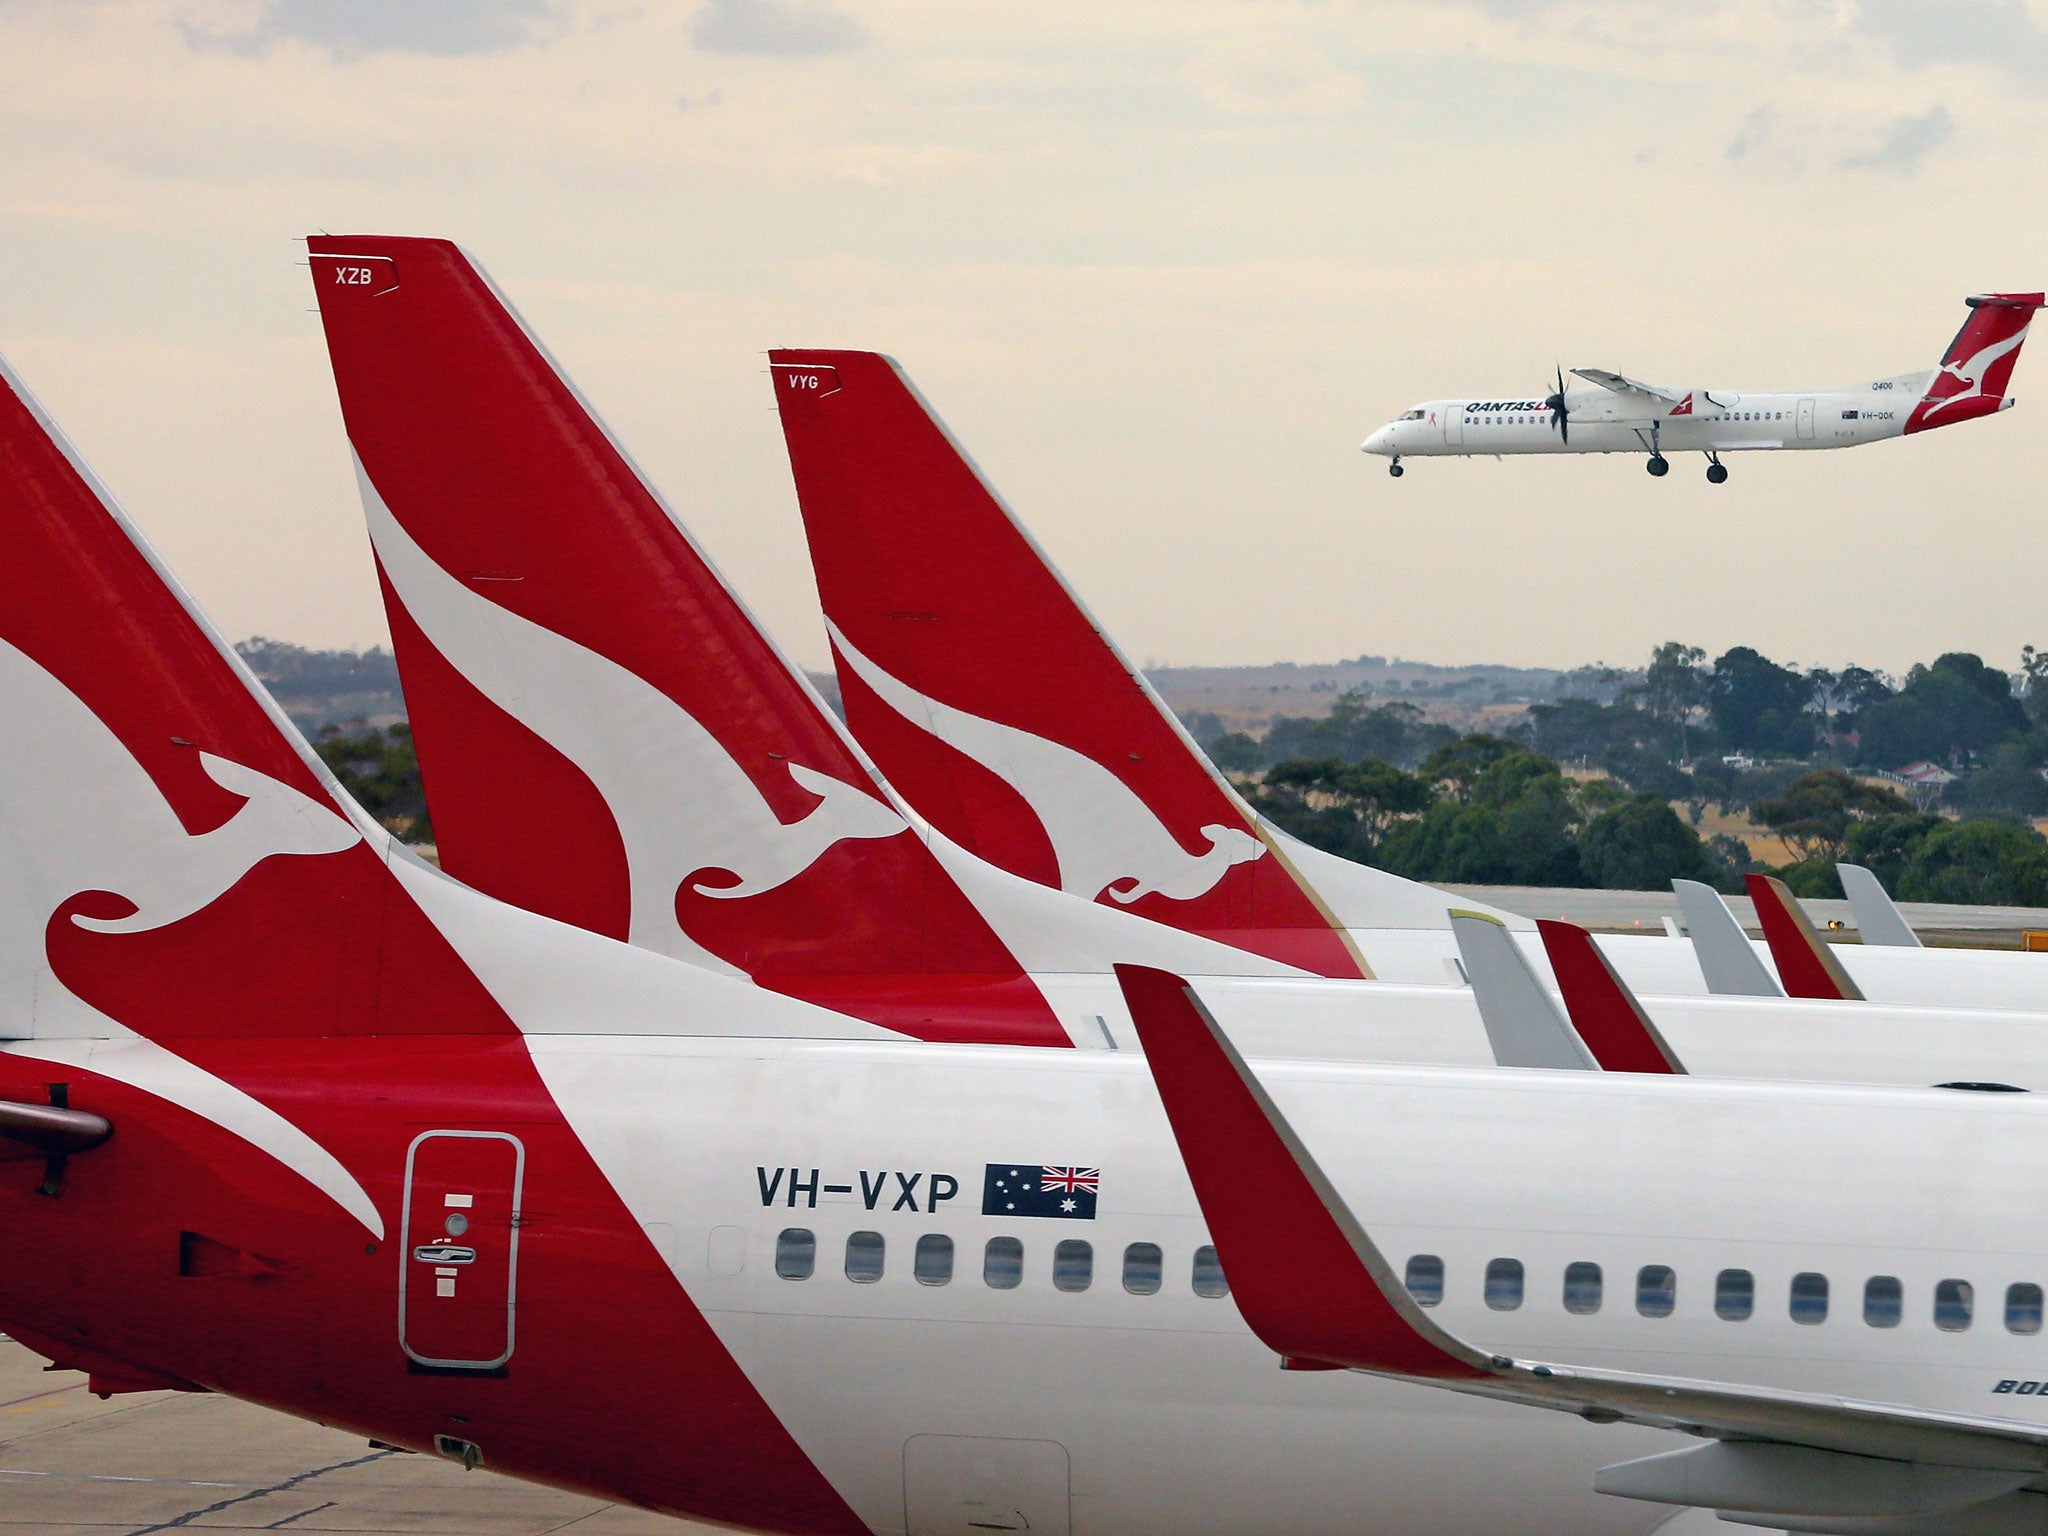 Qantas have launched a new upgrade system